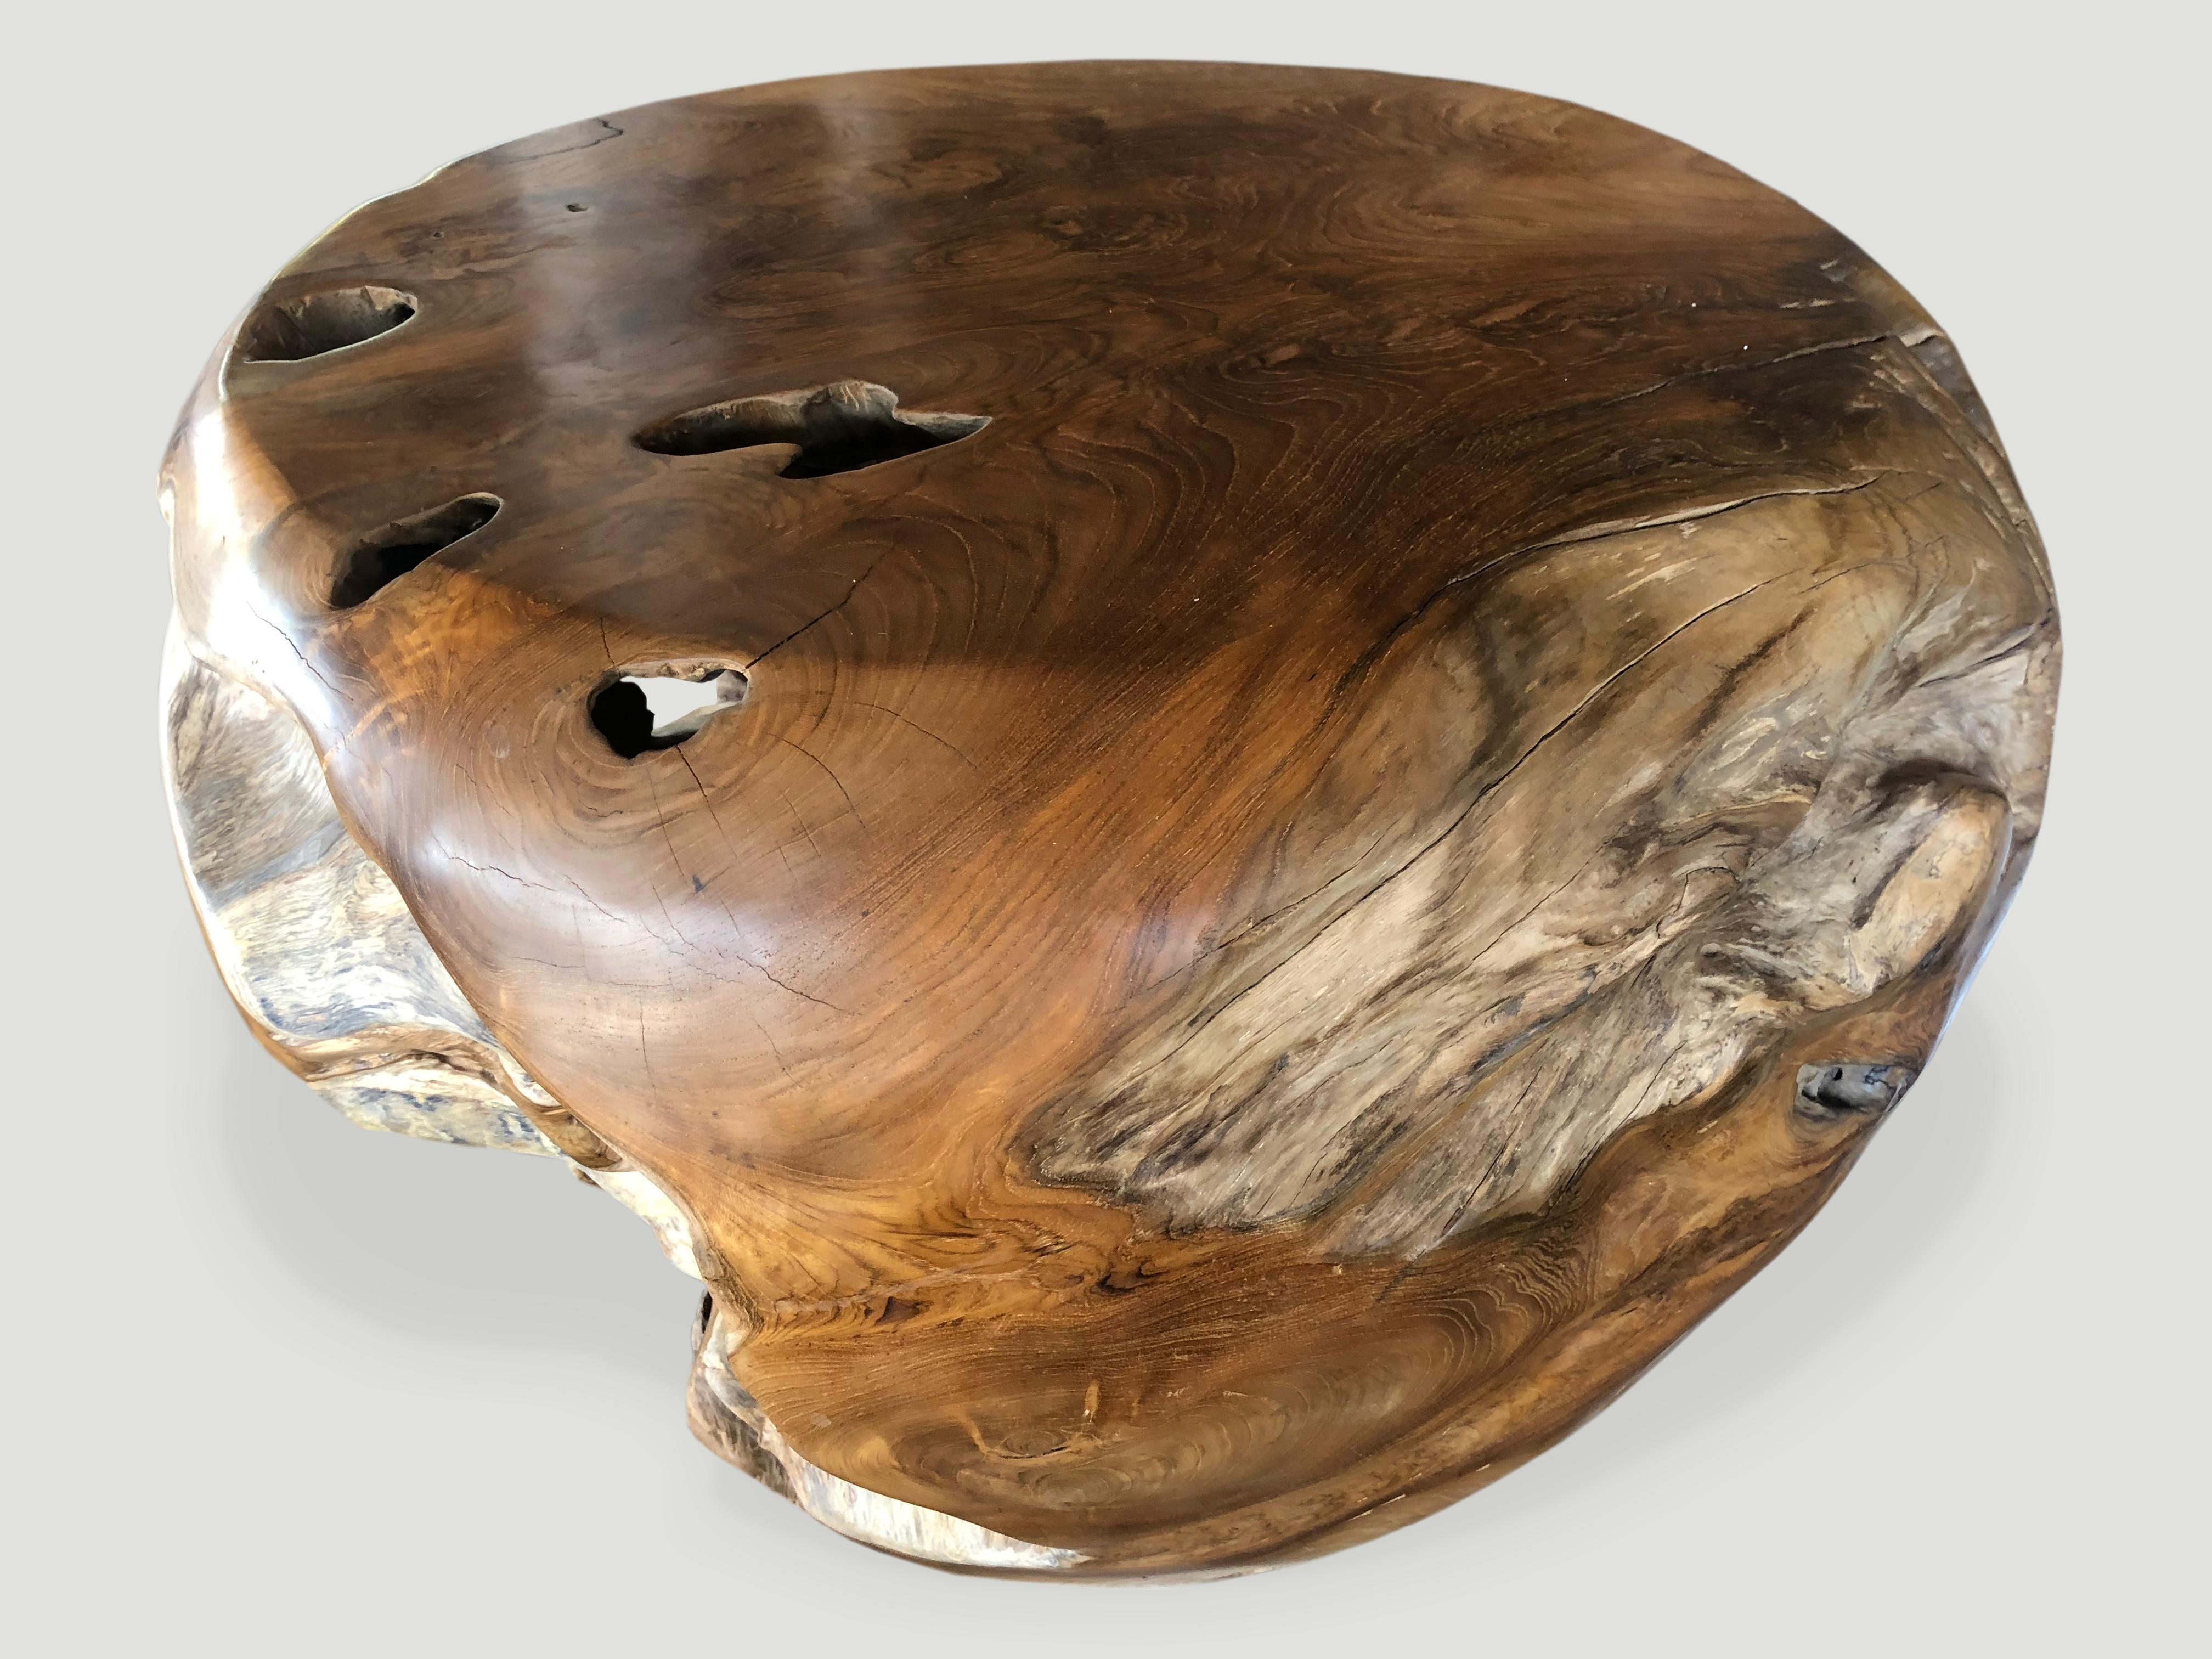 Reclaimed teak root coffee table, hand carved into a beautiful drum shape. The top flat section is 23? diameter and the outer drum shape expands to 27?. The outer layer is polished and the inner sides we have left in their natural organic form.